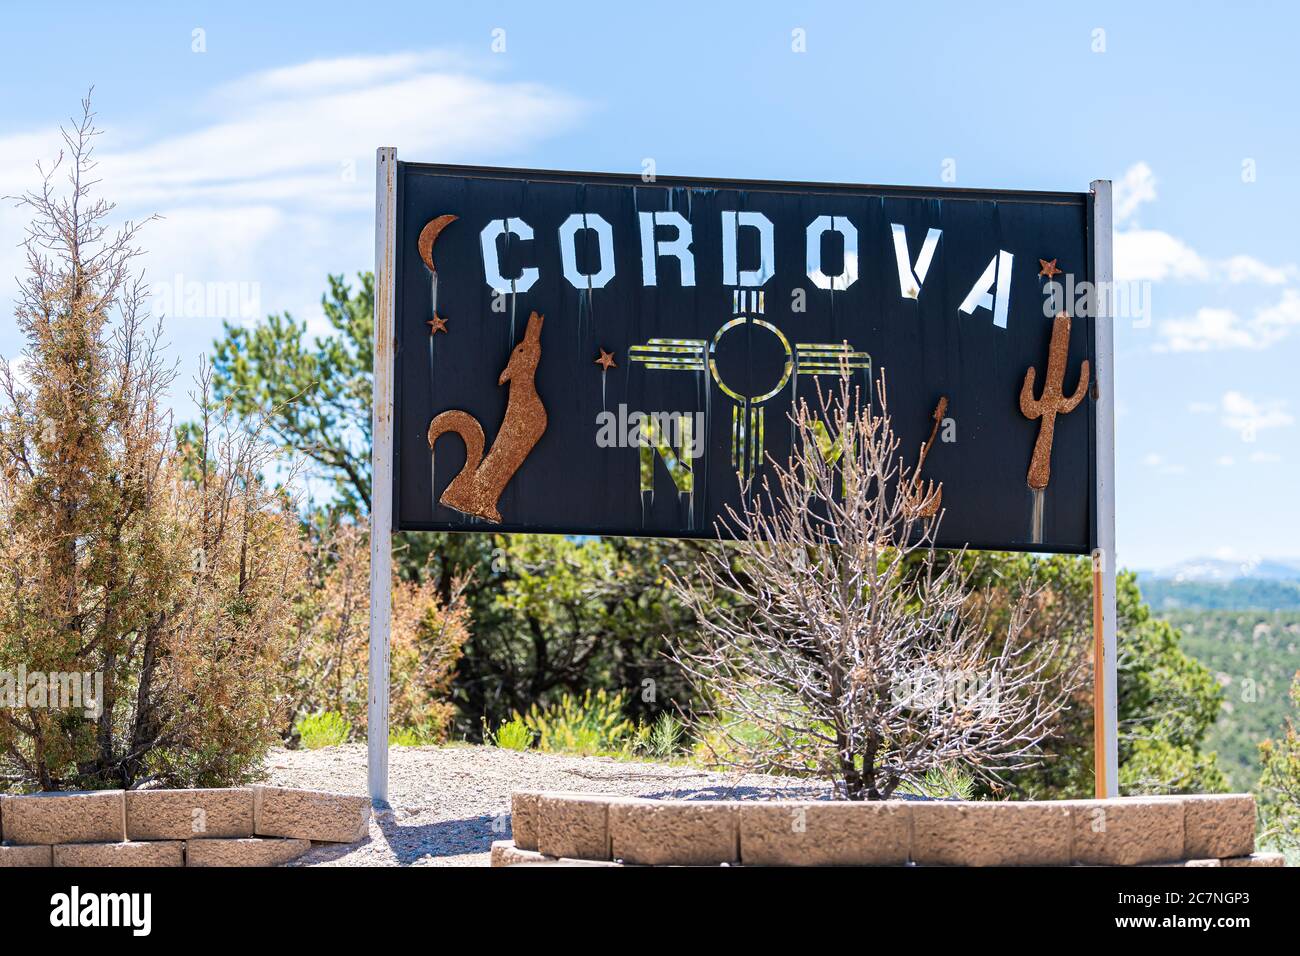 Cordova, USA - June 19, 2019: Scenic drive during summer at High Road to Taos famous trip near Santa Fe and Chimayo with welcome entrance sign to town Stock Photo